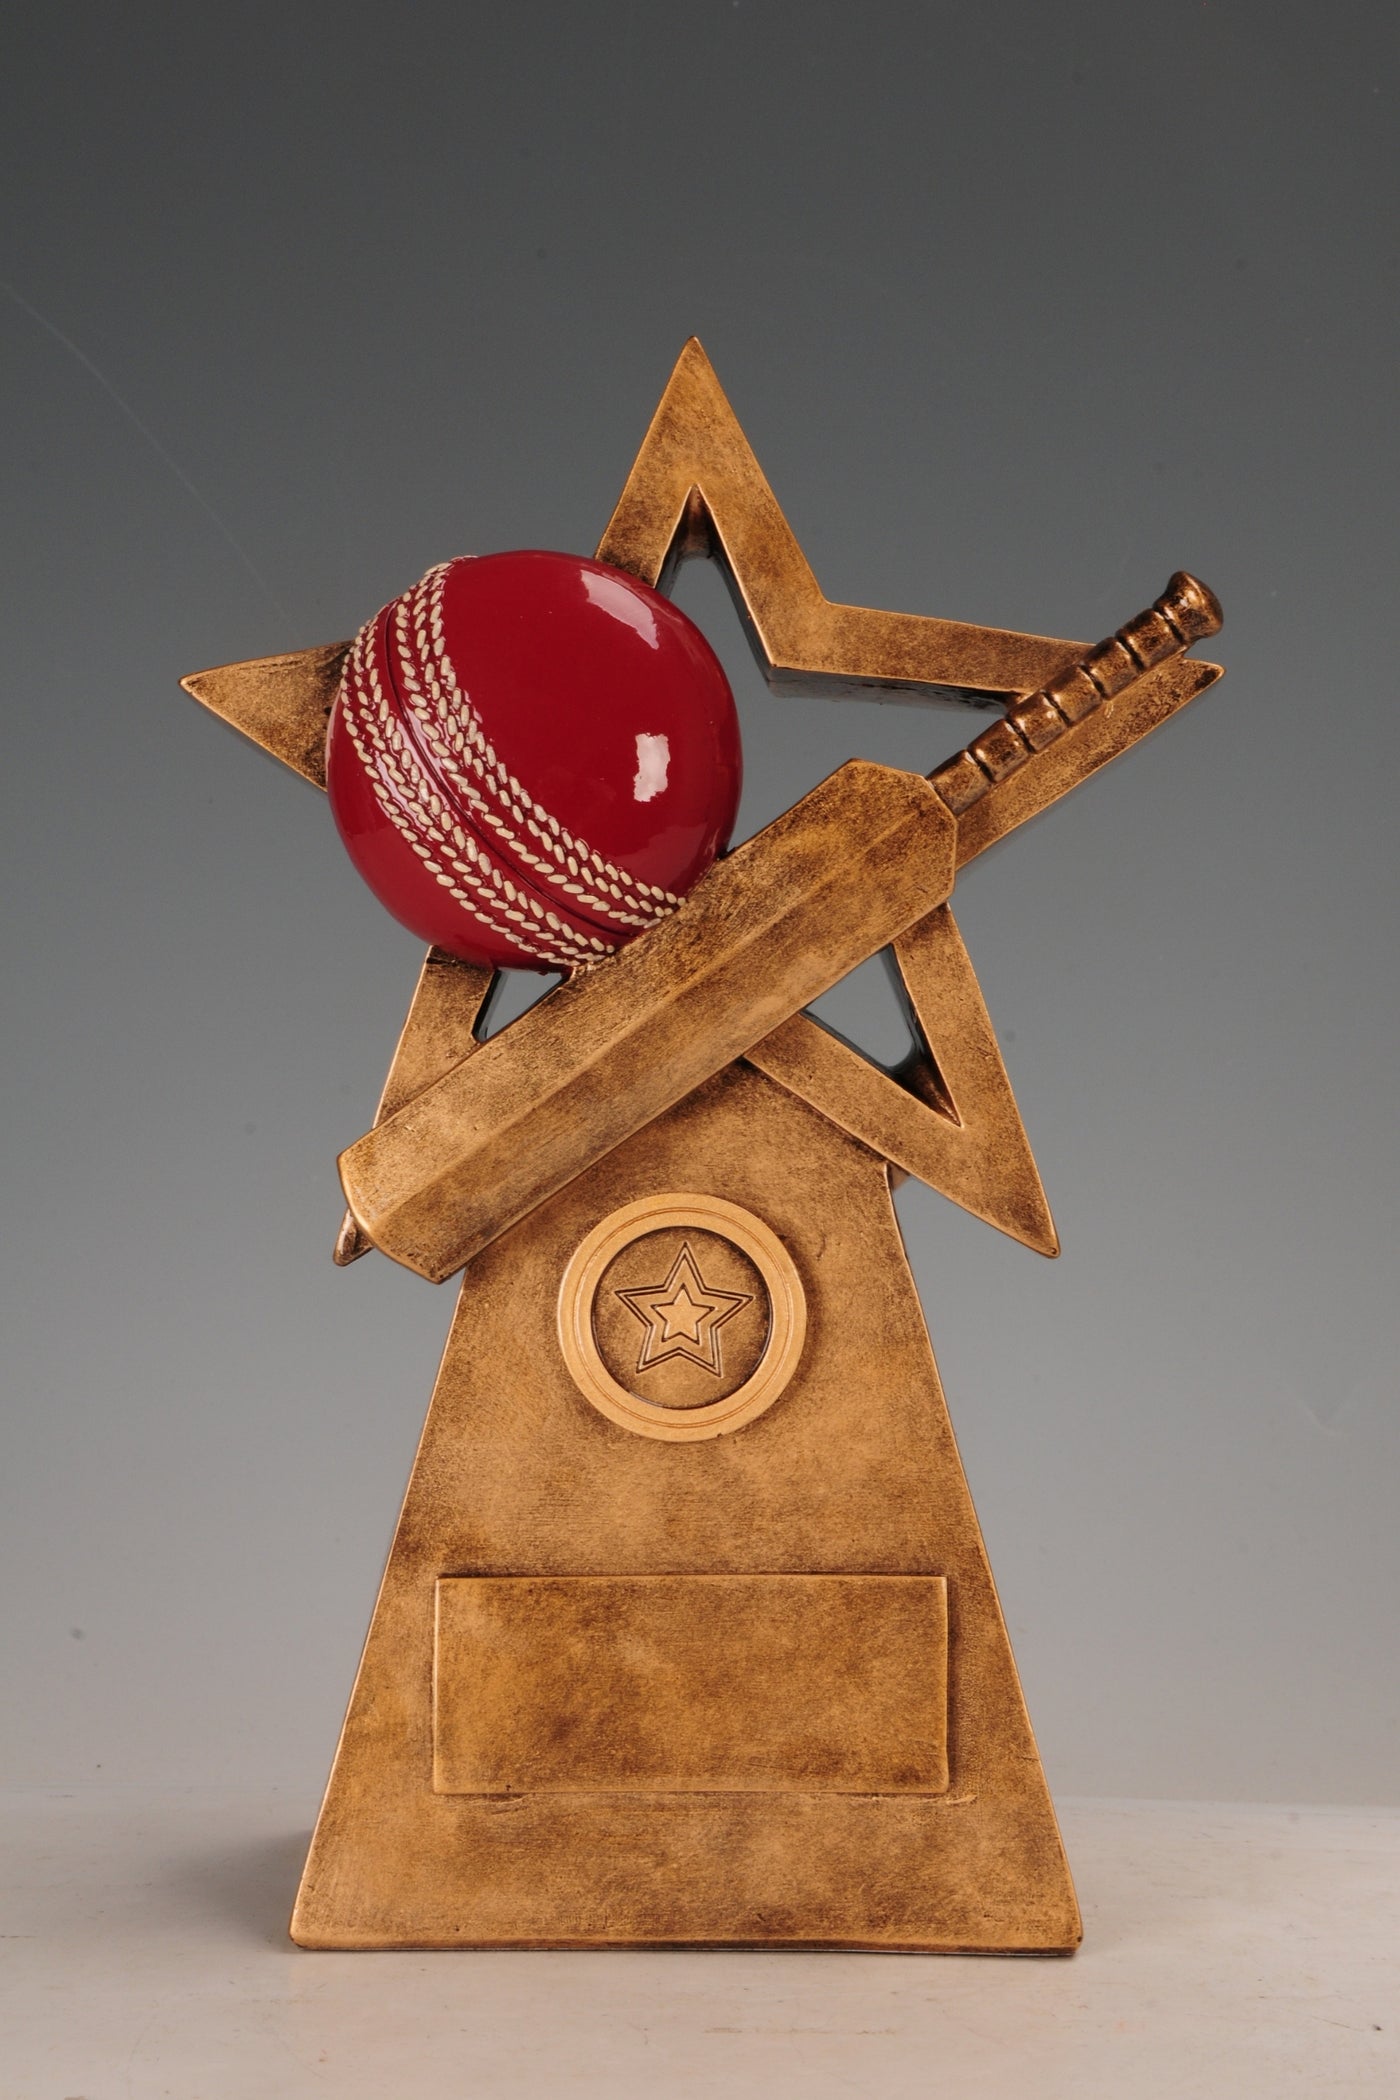 Cricket Ball/Bat on Star and Pyramid showpiece for your home or office Decor